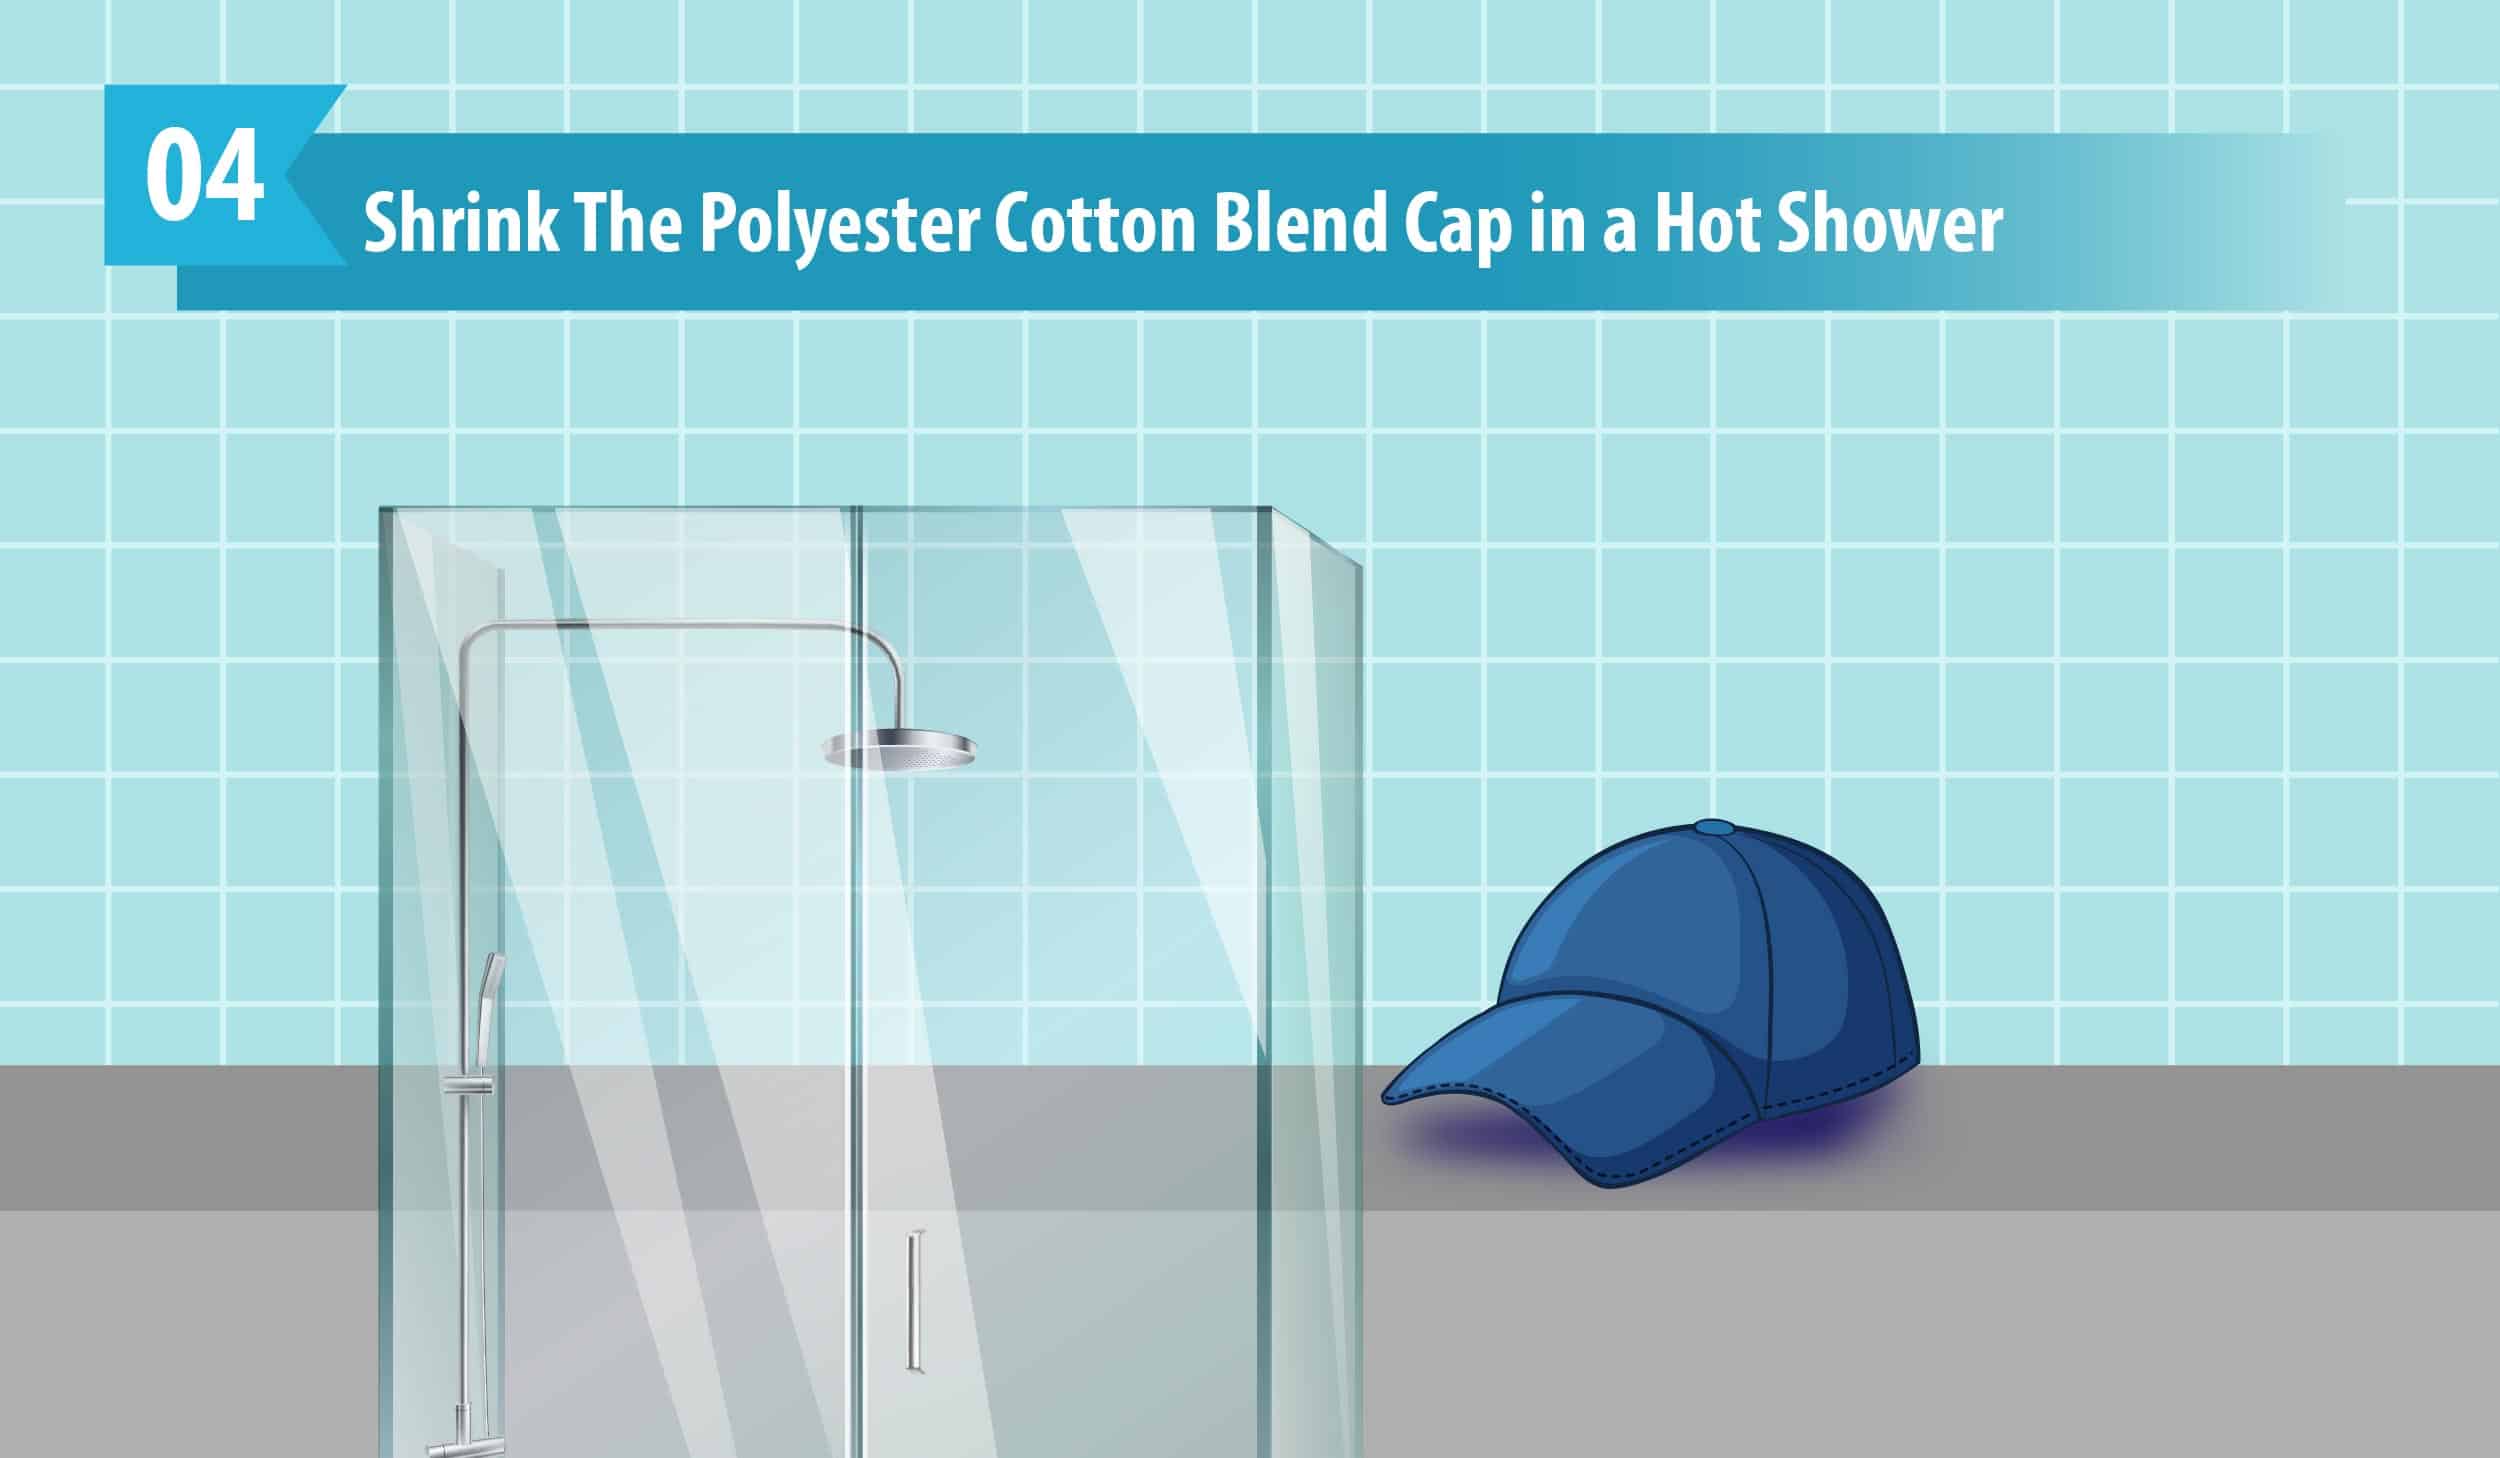 Shrink The Polyester Cotton Blend Cap in a Hot Shower